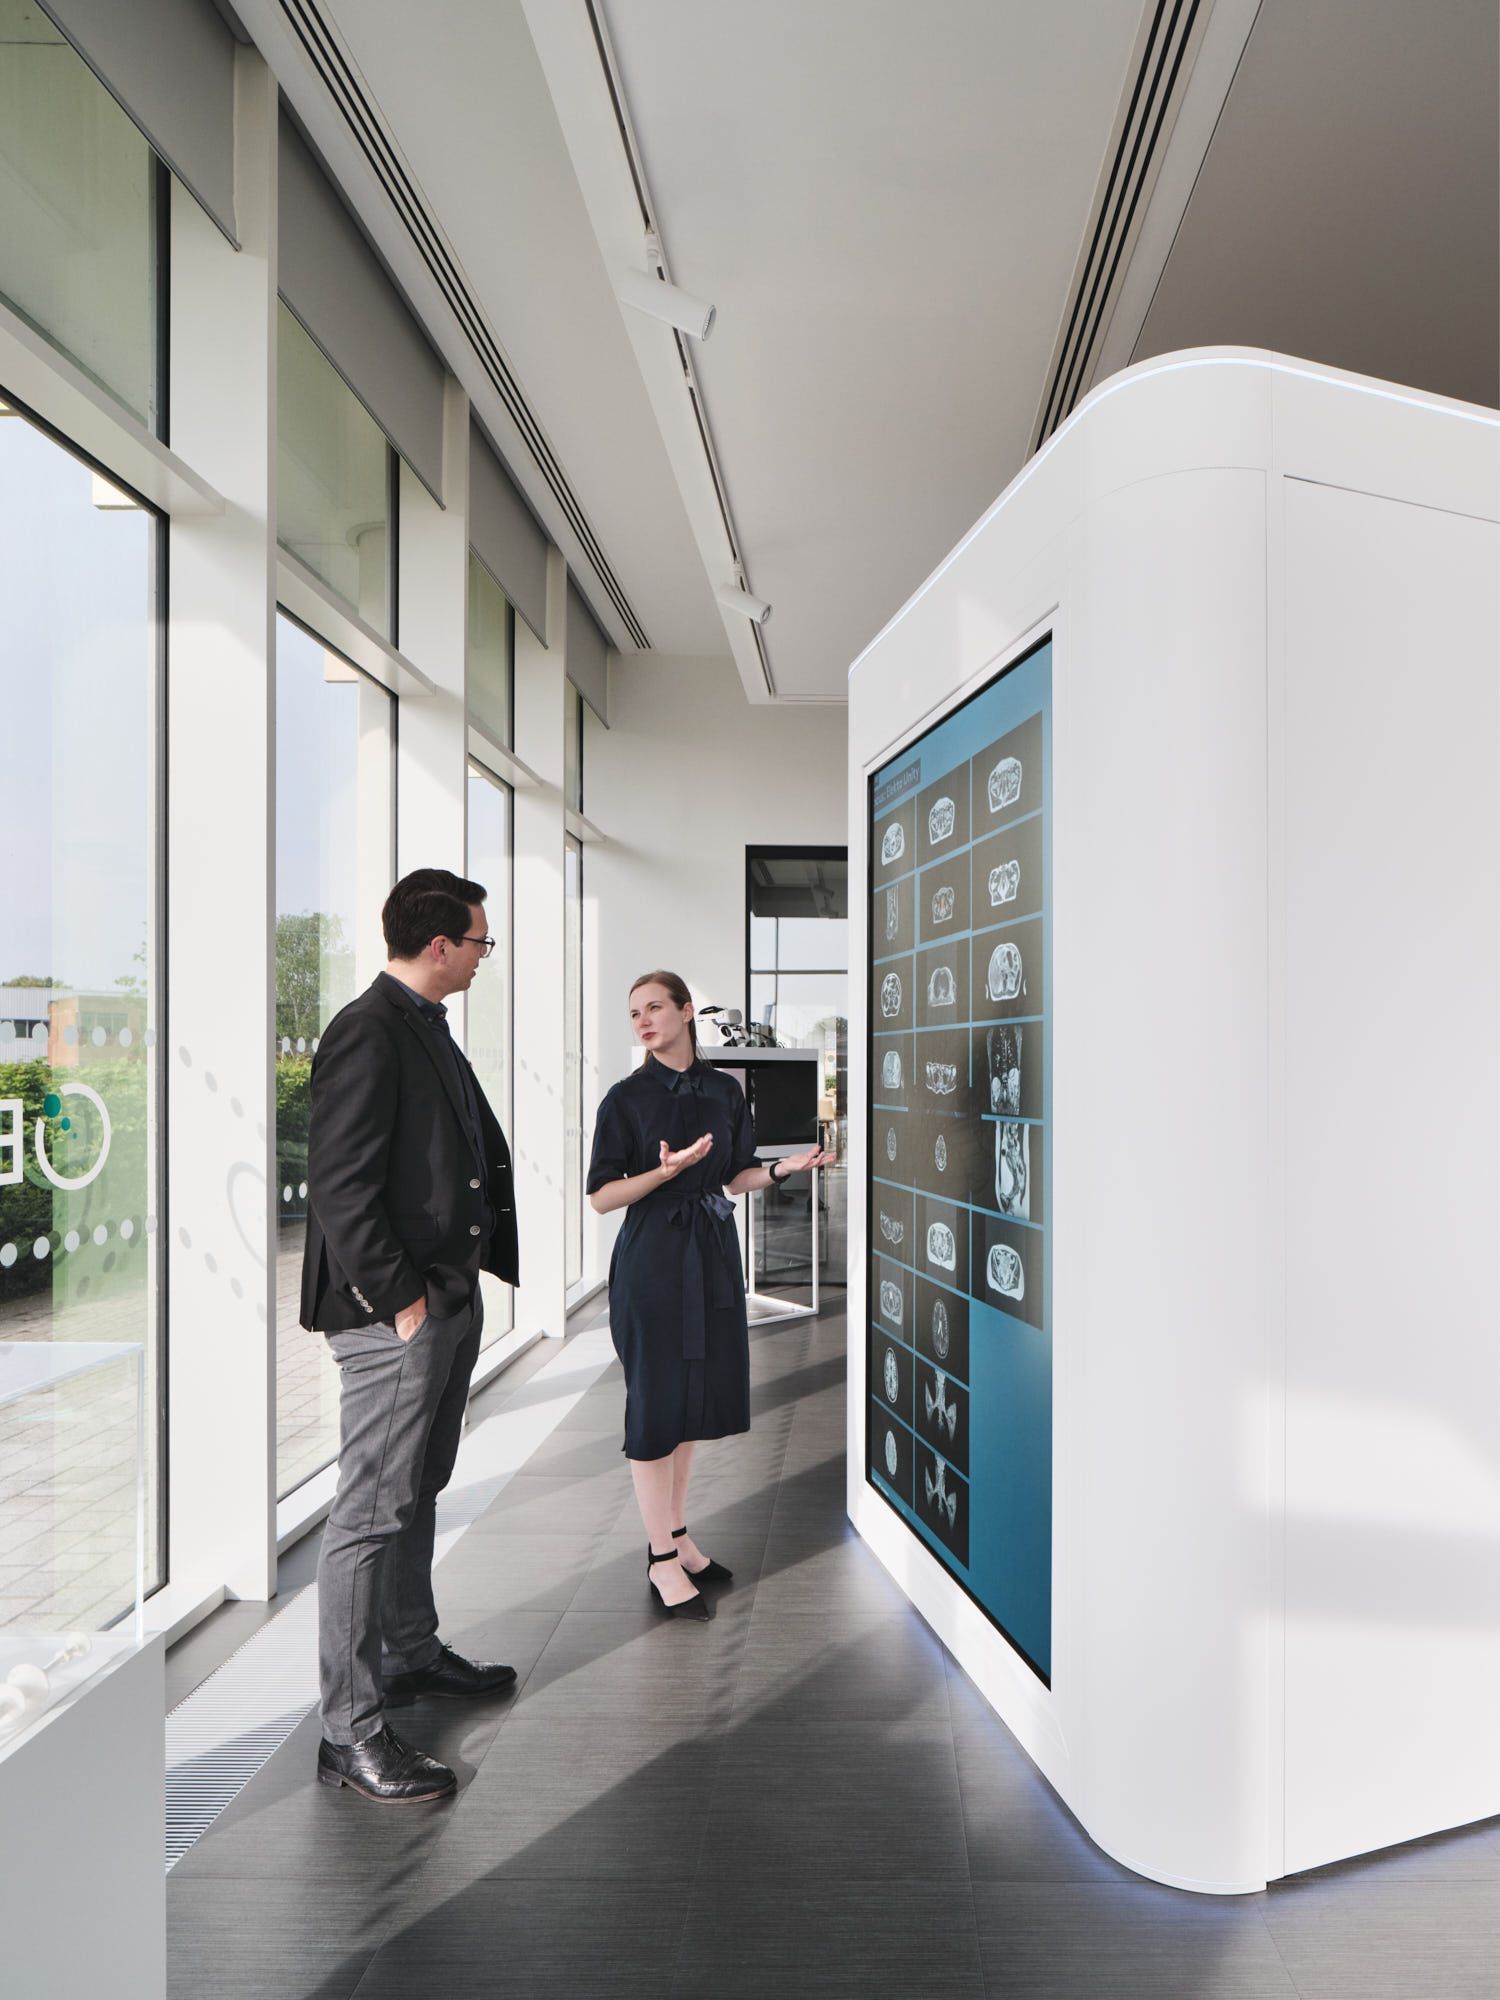 Two people interacting with a screen at Elekta.